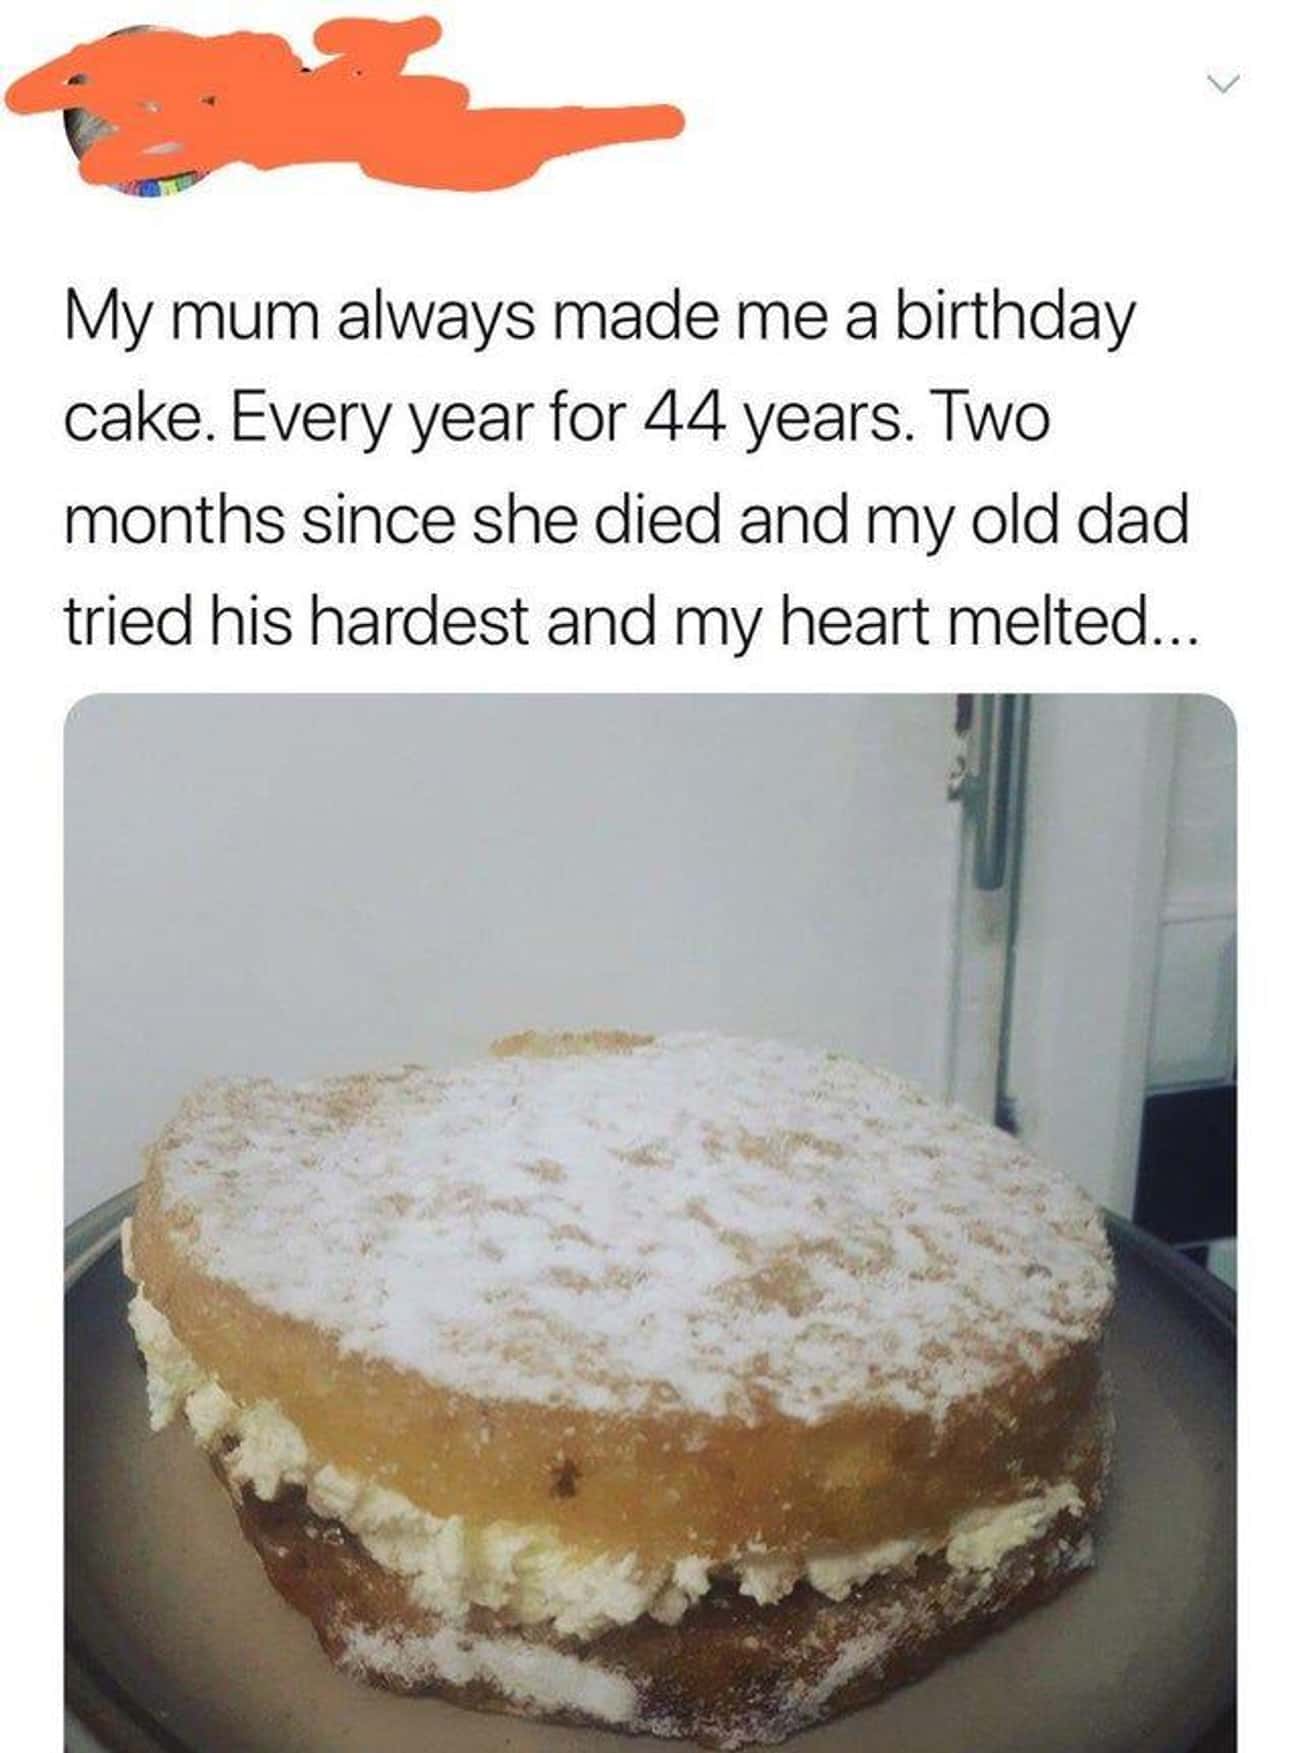 A Special Cake Made With Love From Dad